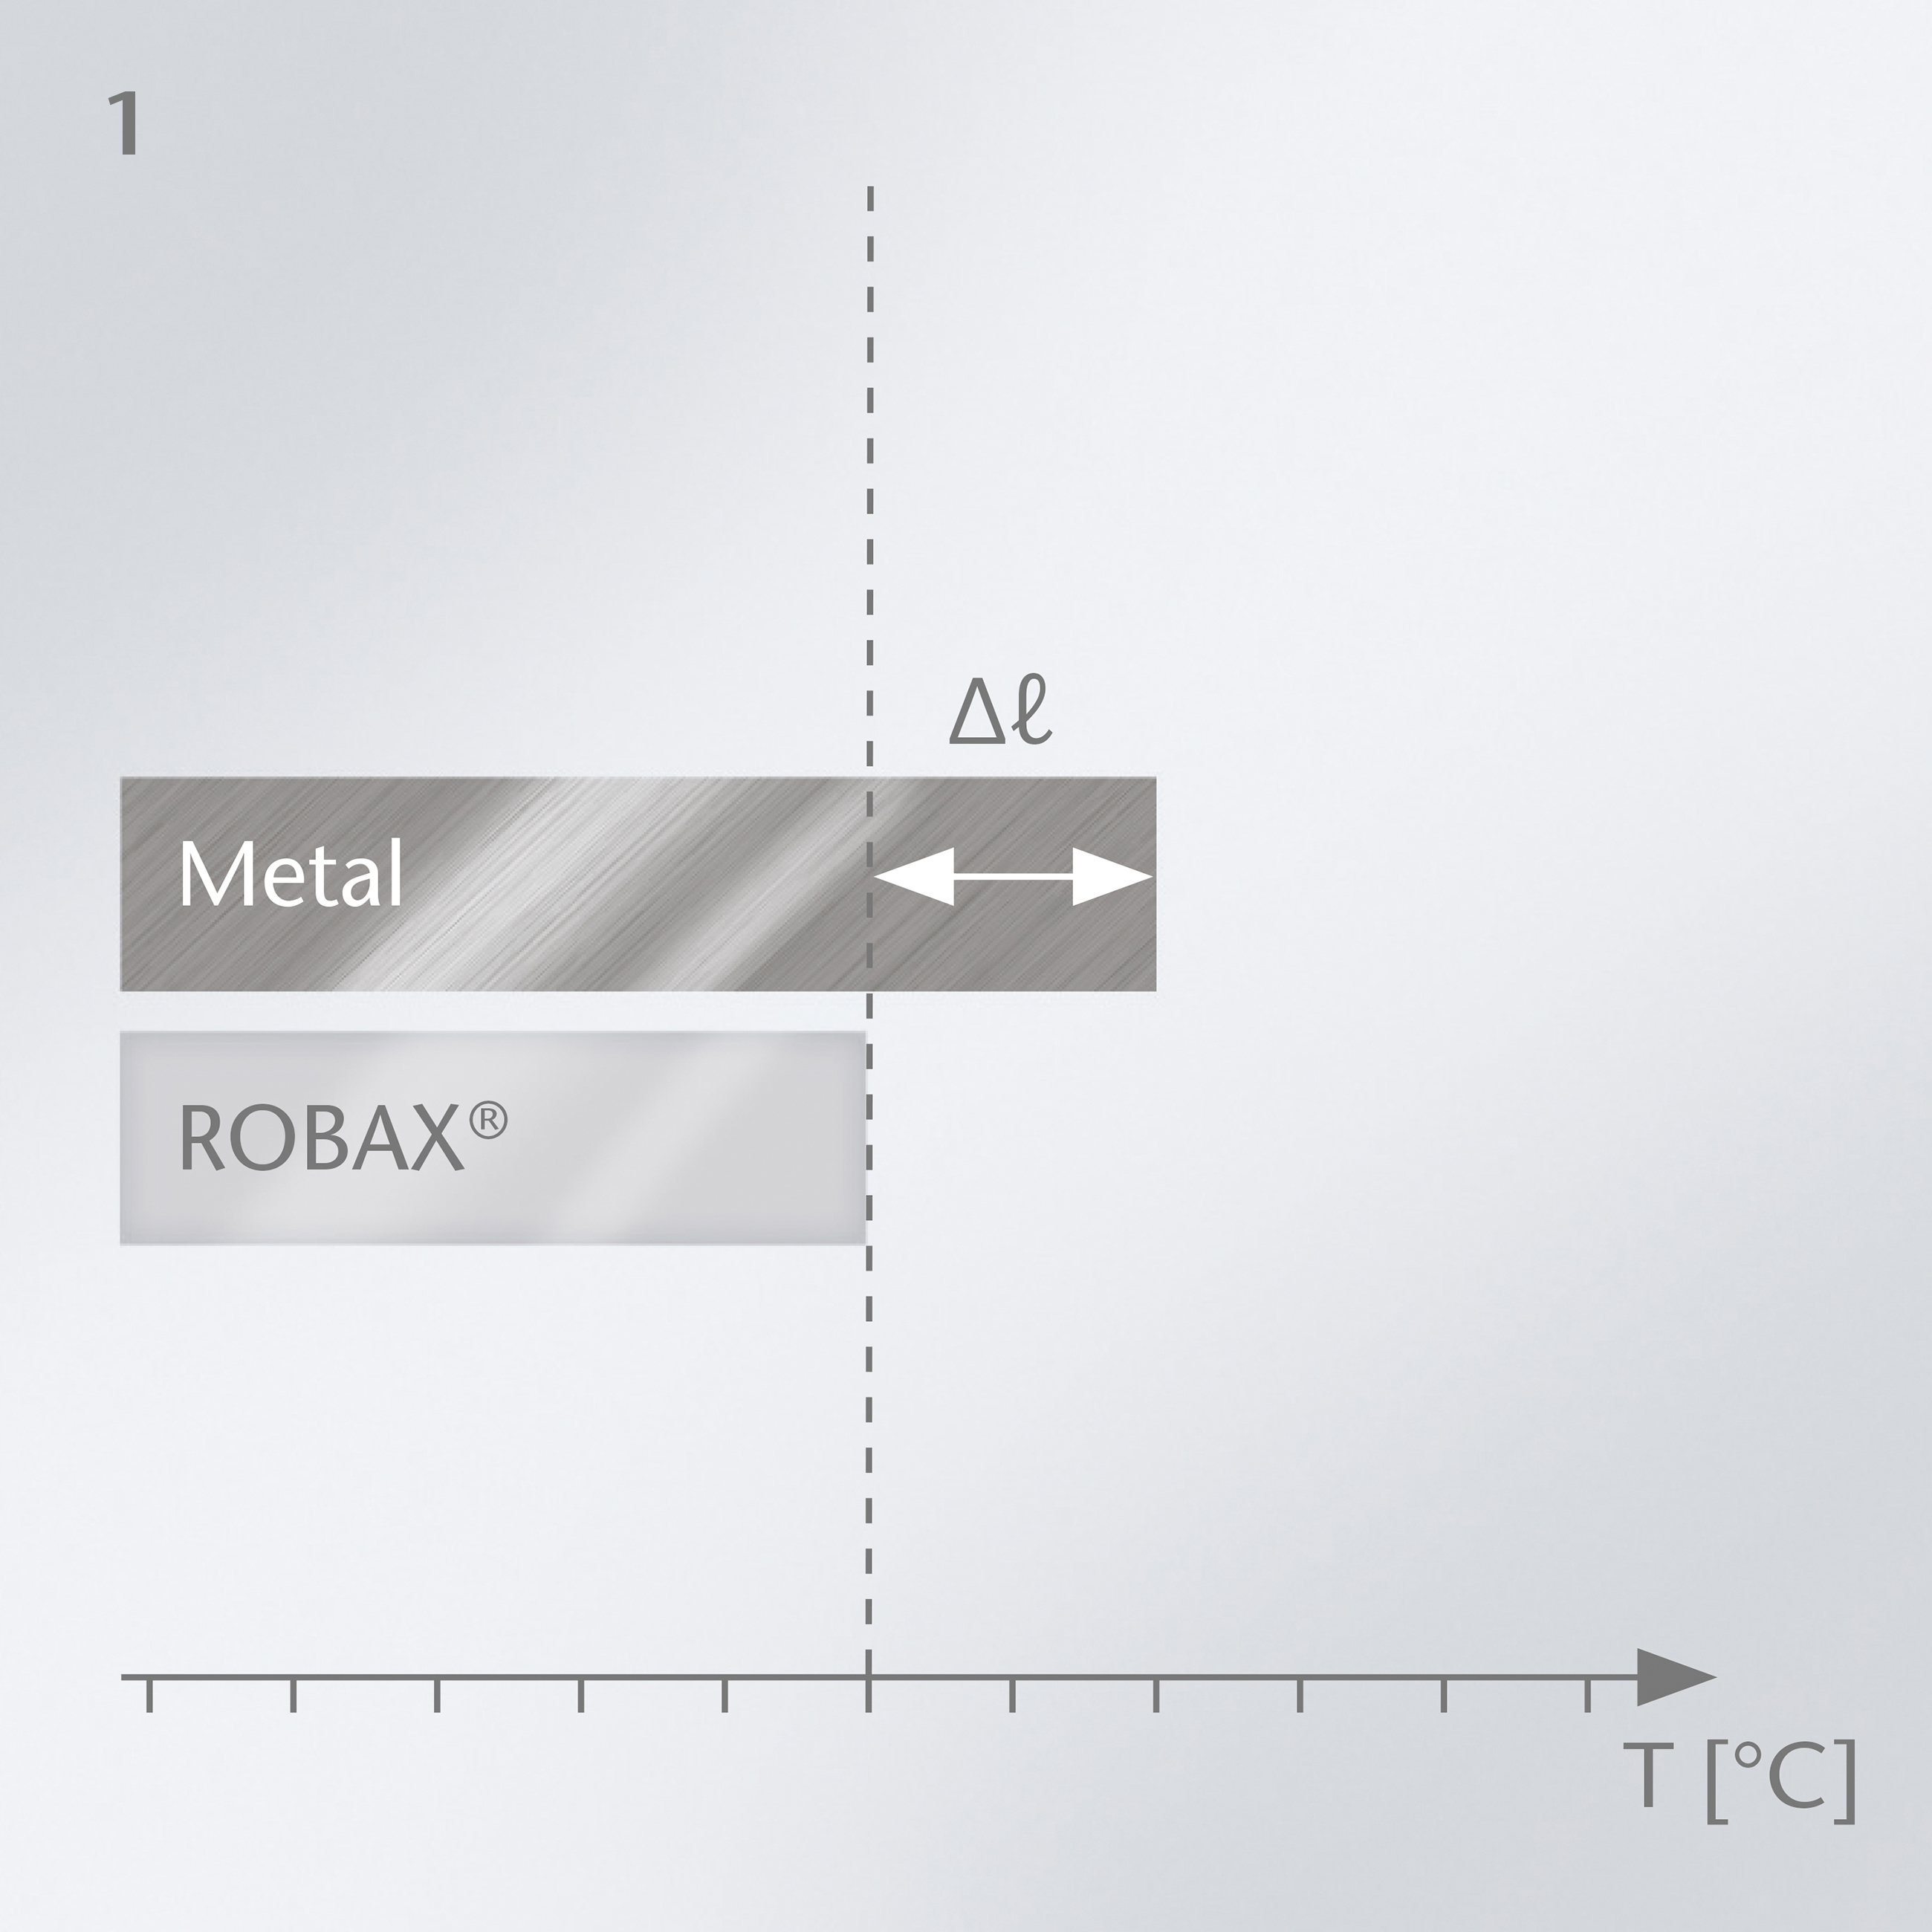 Graph showing the near-zero thermal expansion of SCHOTT ROBAX® glass-ceramic compared to metal